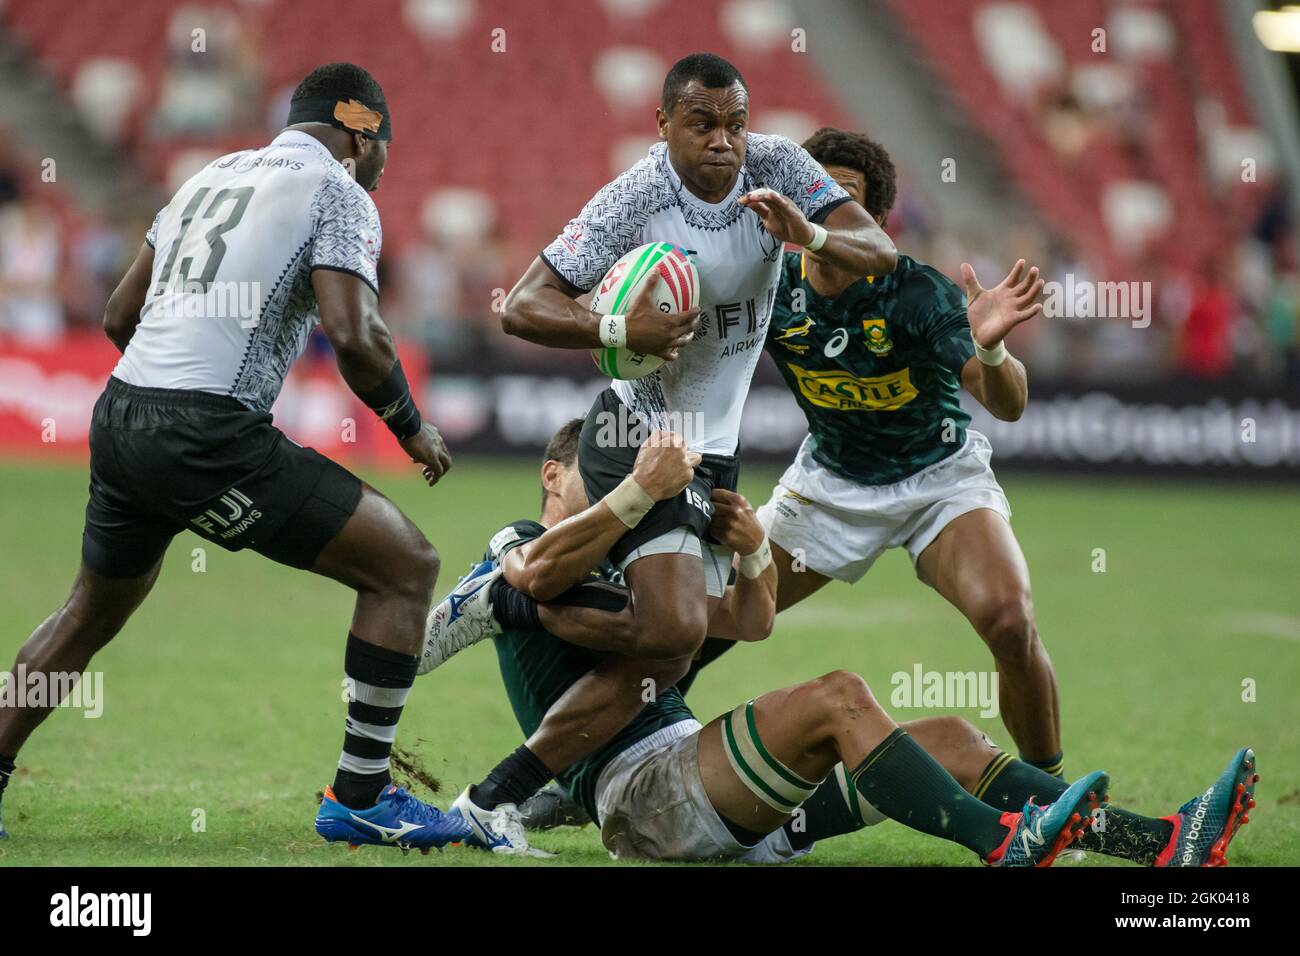 SINGAPORE-APRIL 14: Fiji 7s Team (white plays against South African 7s team (green) during the Cup Final match of HSBC World Rugby Singapore Sevens on April 14, 2019 at National Stadium in Singapore Stock Photo